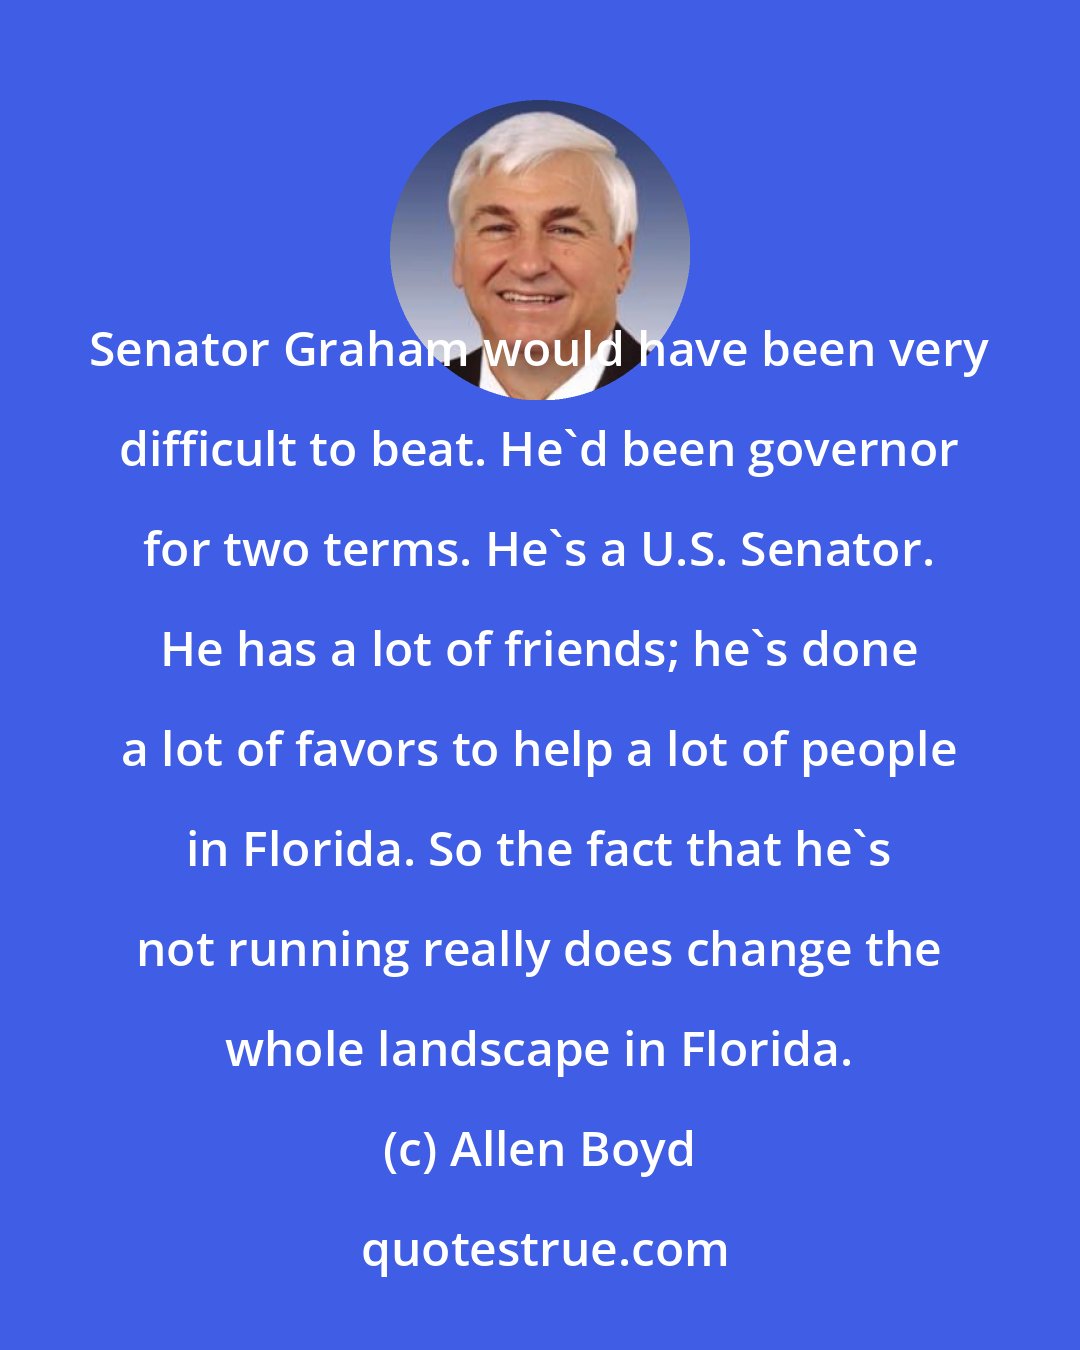 Allen Boyd: Senator Graham would have been very difficult to beat. He'd been governor for two terms. He's a U.S. Senator. He has a lot of friends; he's done a lot of favors to help a lot of people in Florida. So the fact that he's not running really does change the whole landscape in Florida.